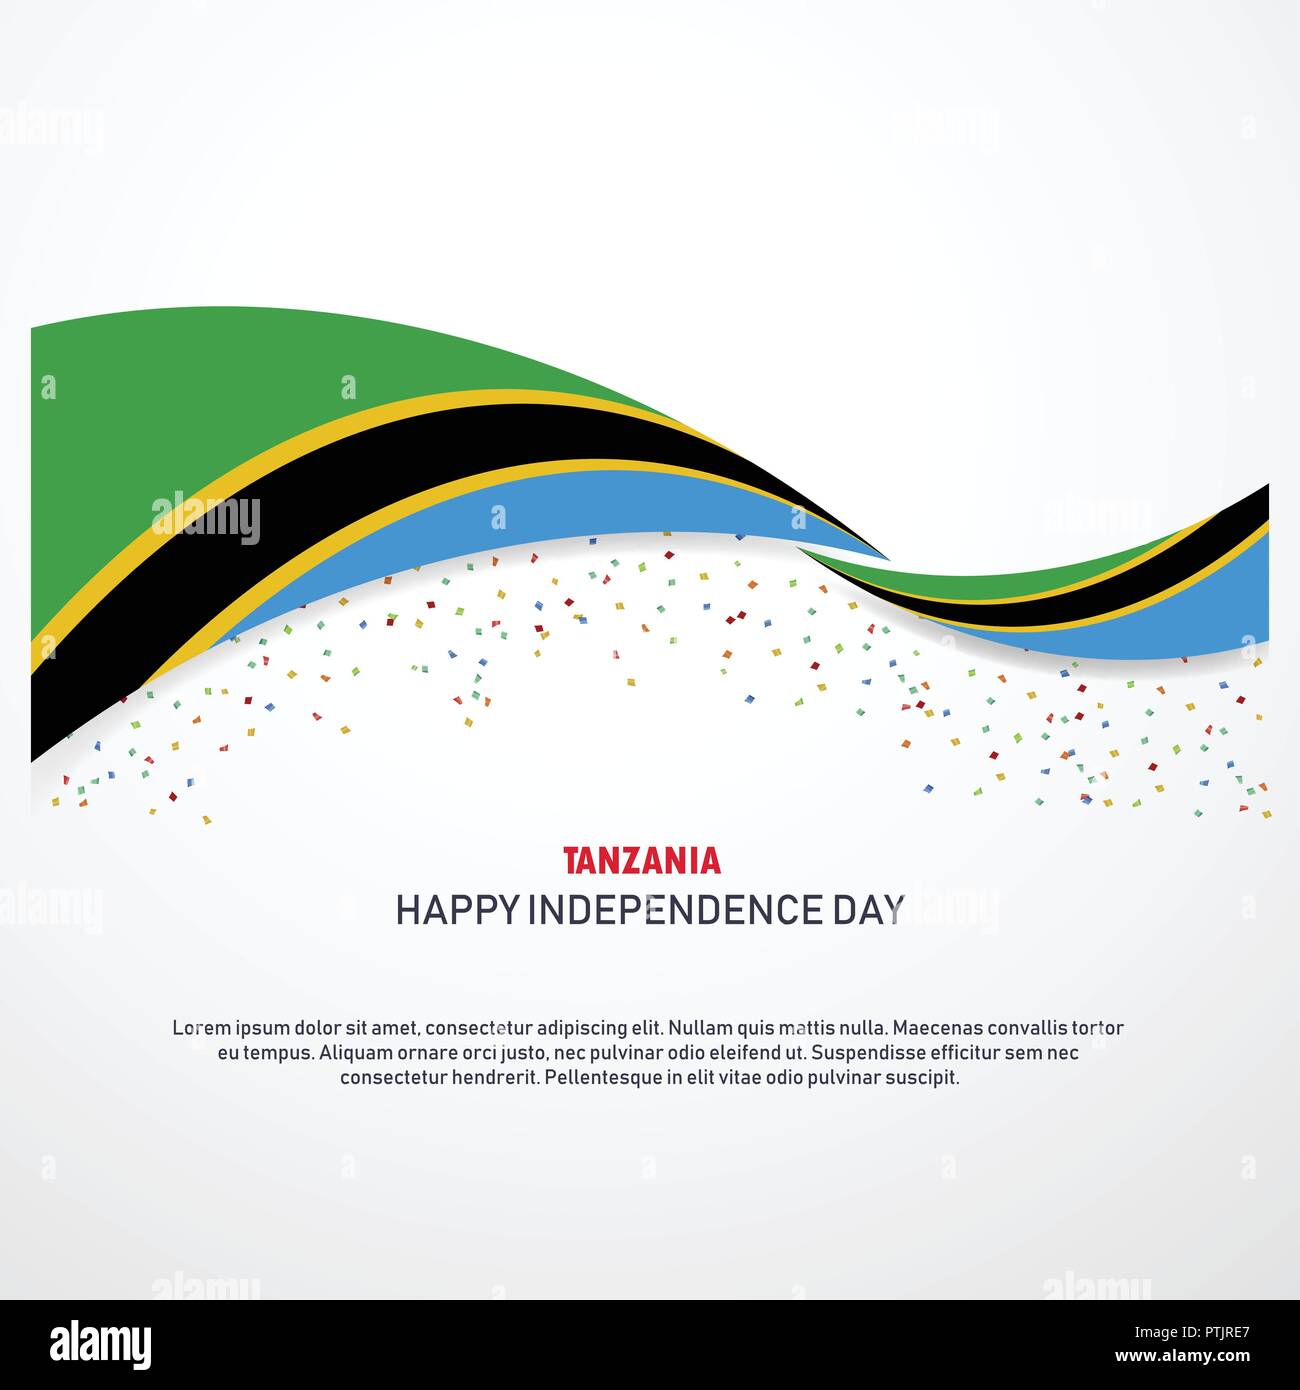 Tanzania Happy independence day Background Stock Vector Image & Art - Alamy